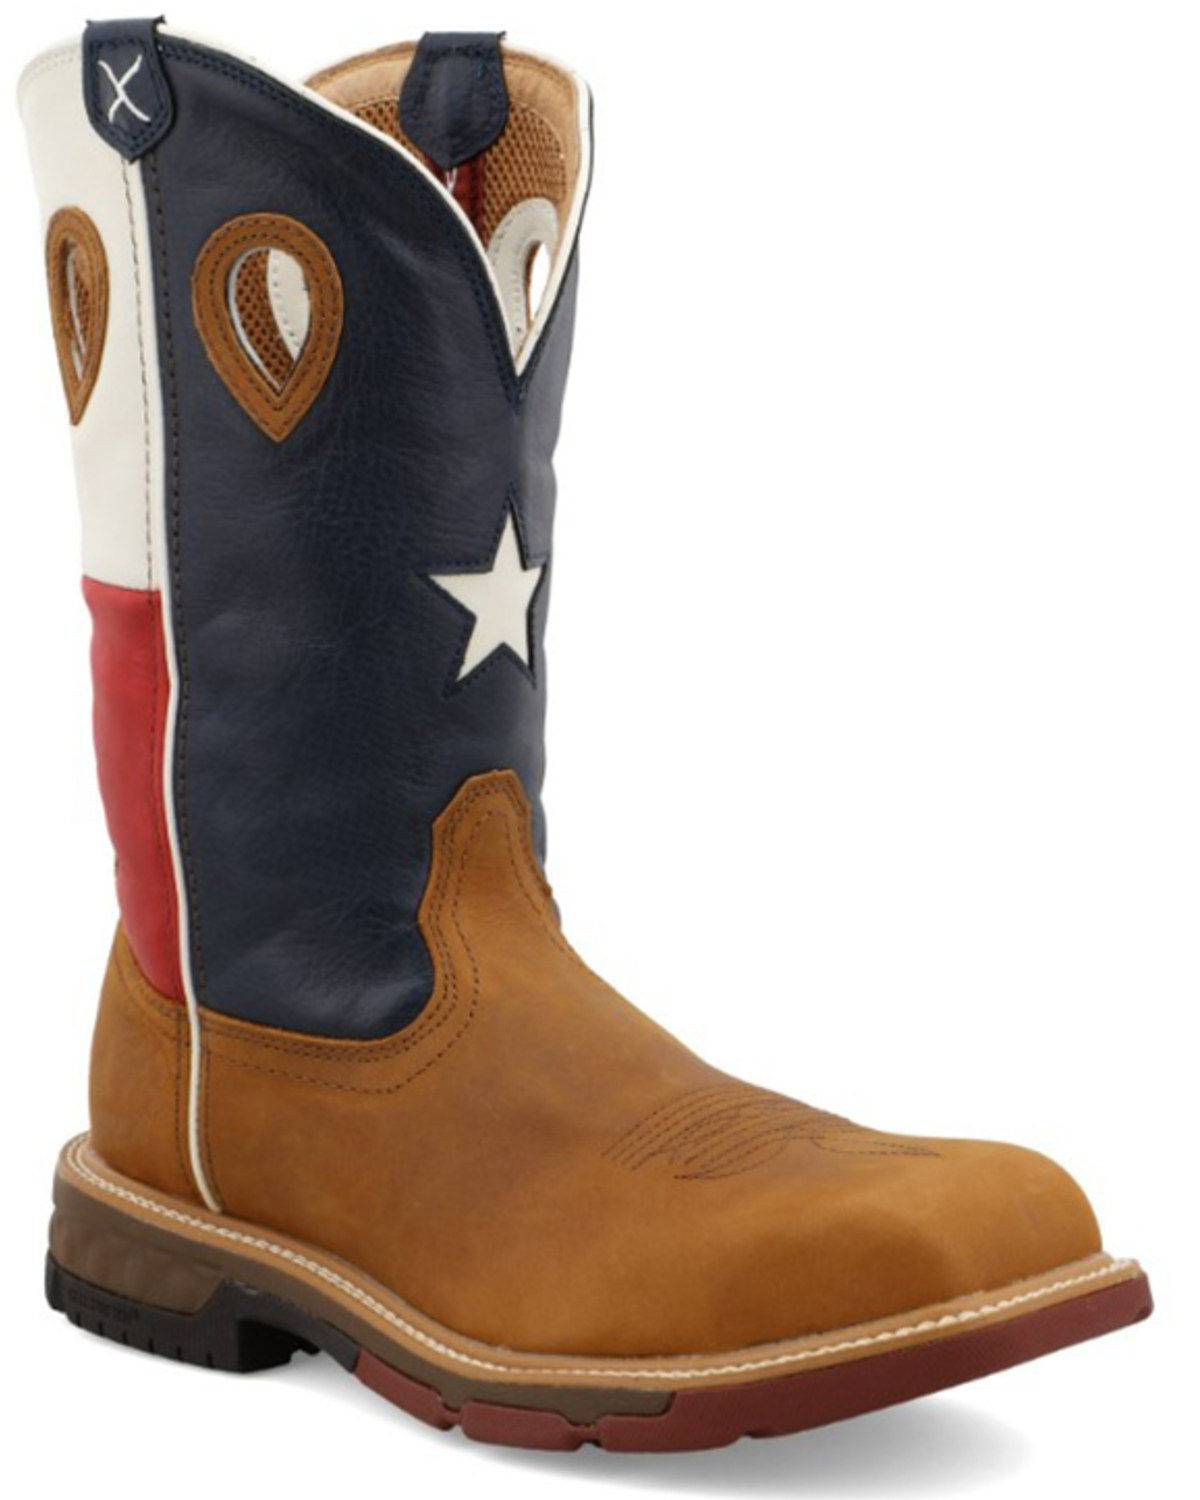 Twisted X Men's American Flag Western Work Boots - Nano Composite Toe